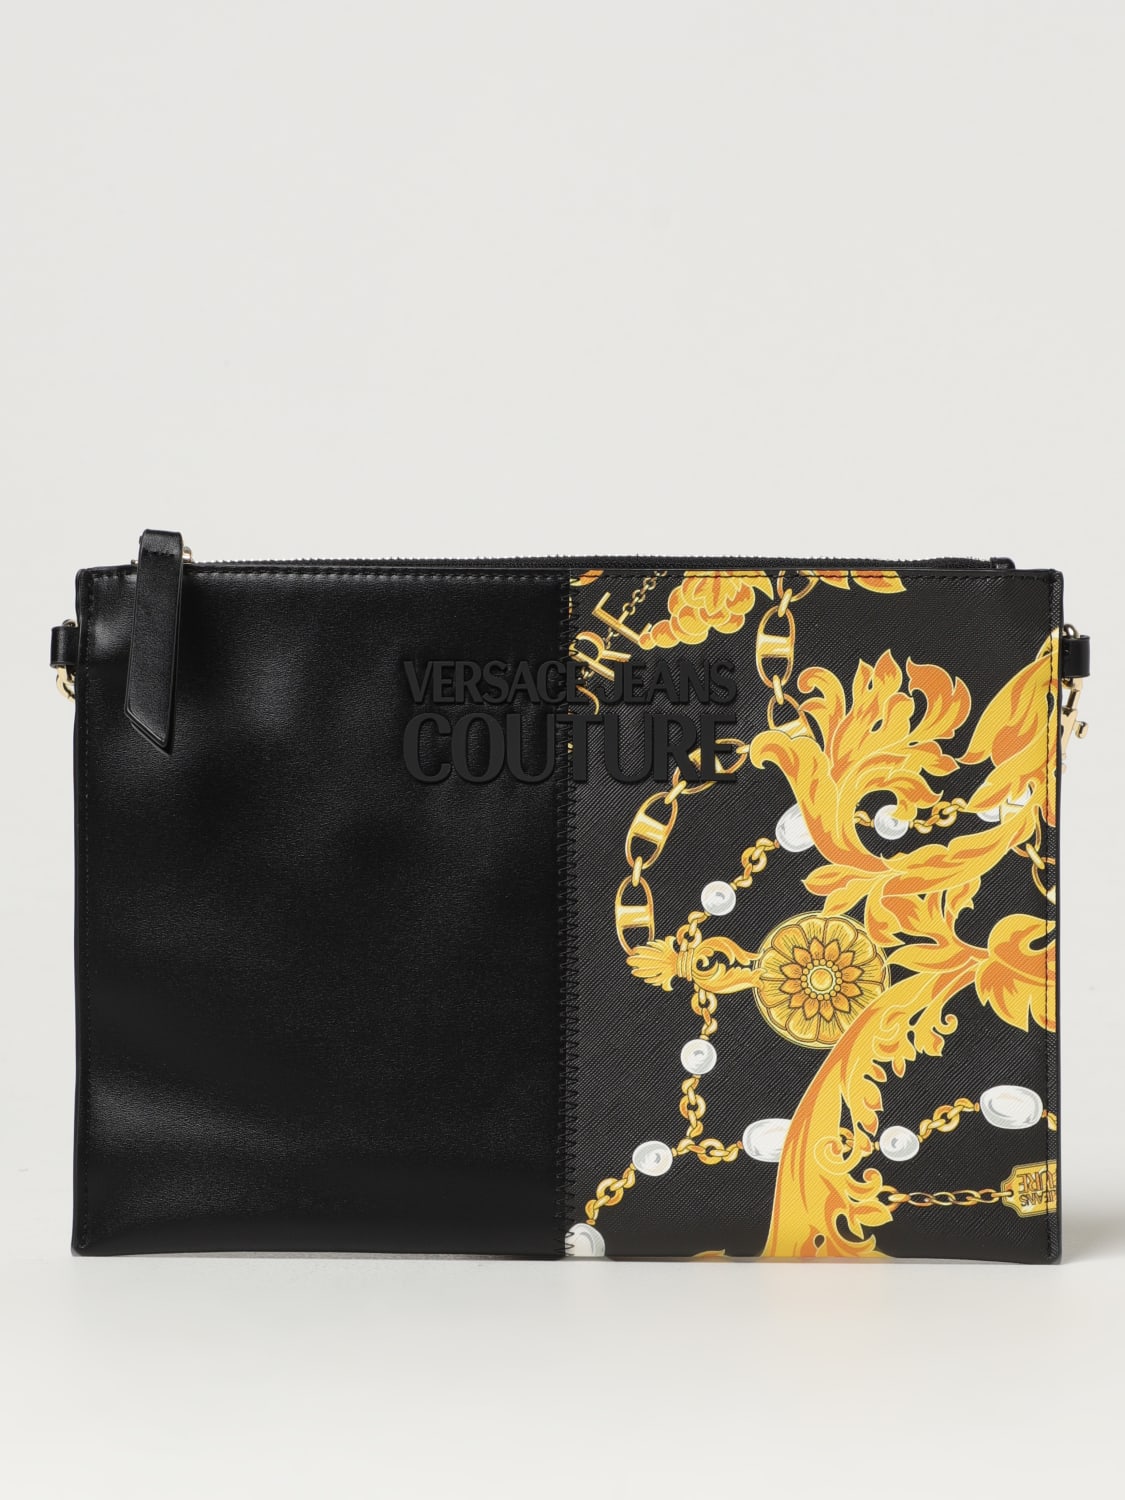 VERSACE JEANS COUTURE クラッチバッグ ブラック高さ20cm